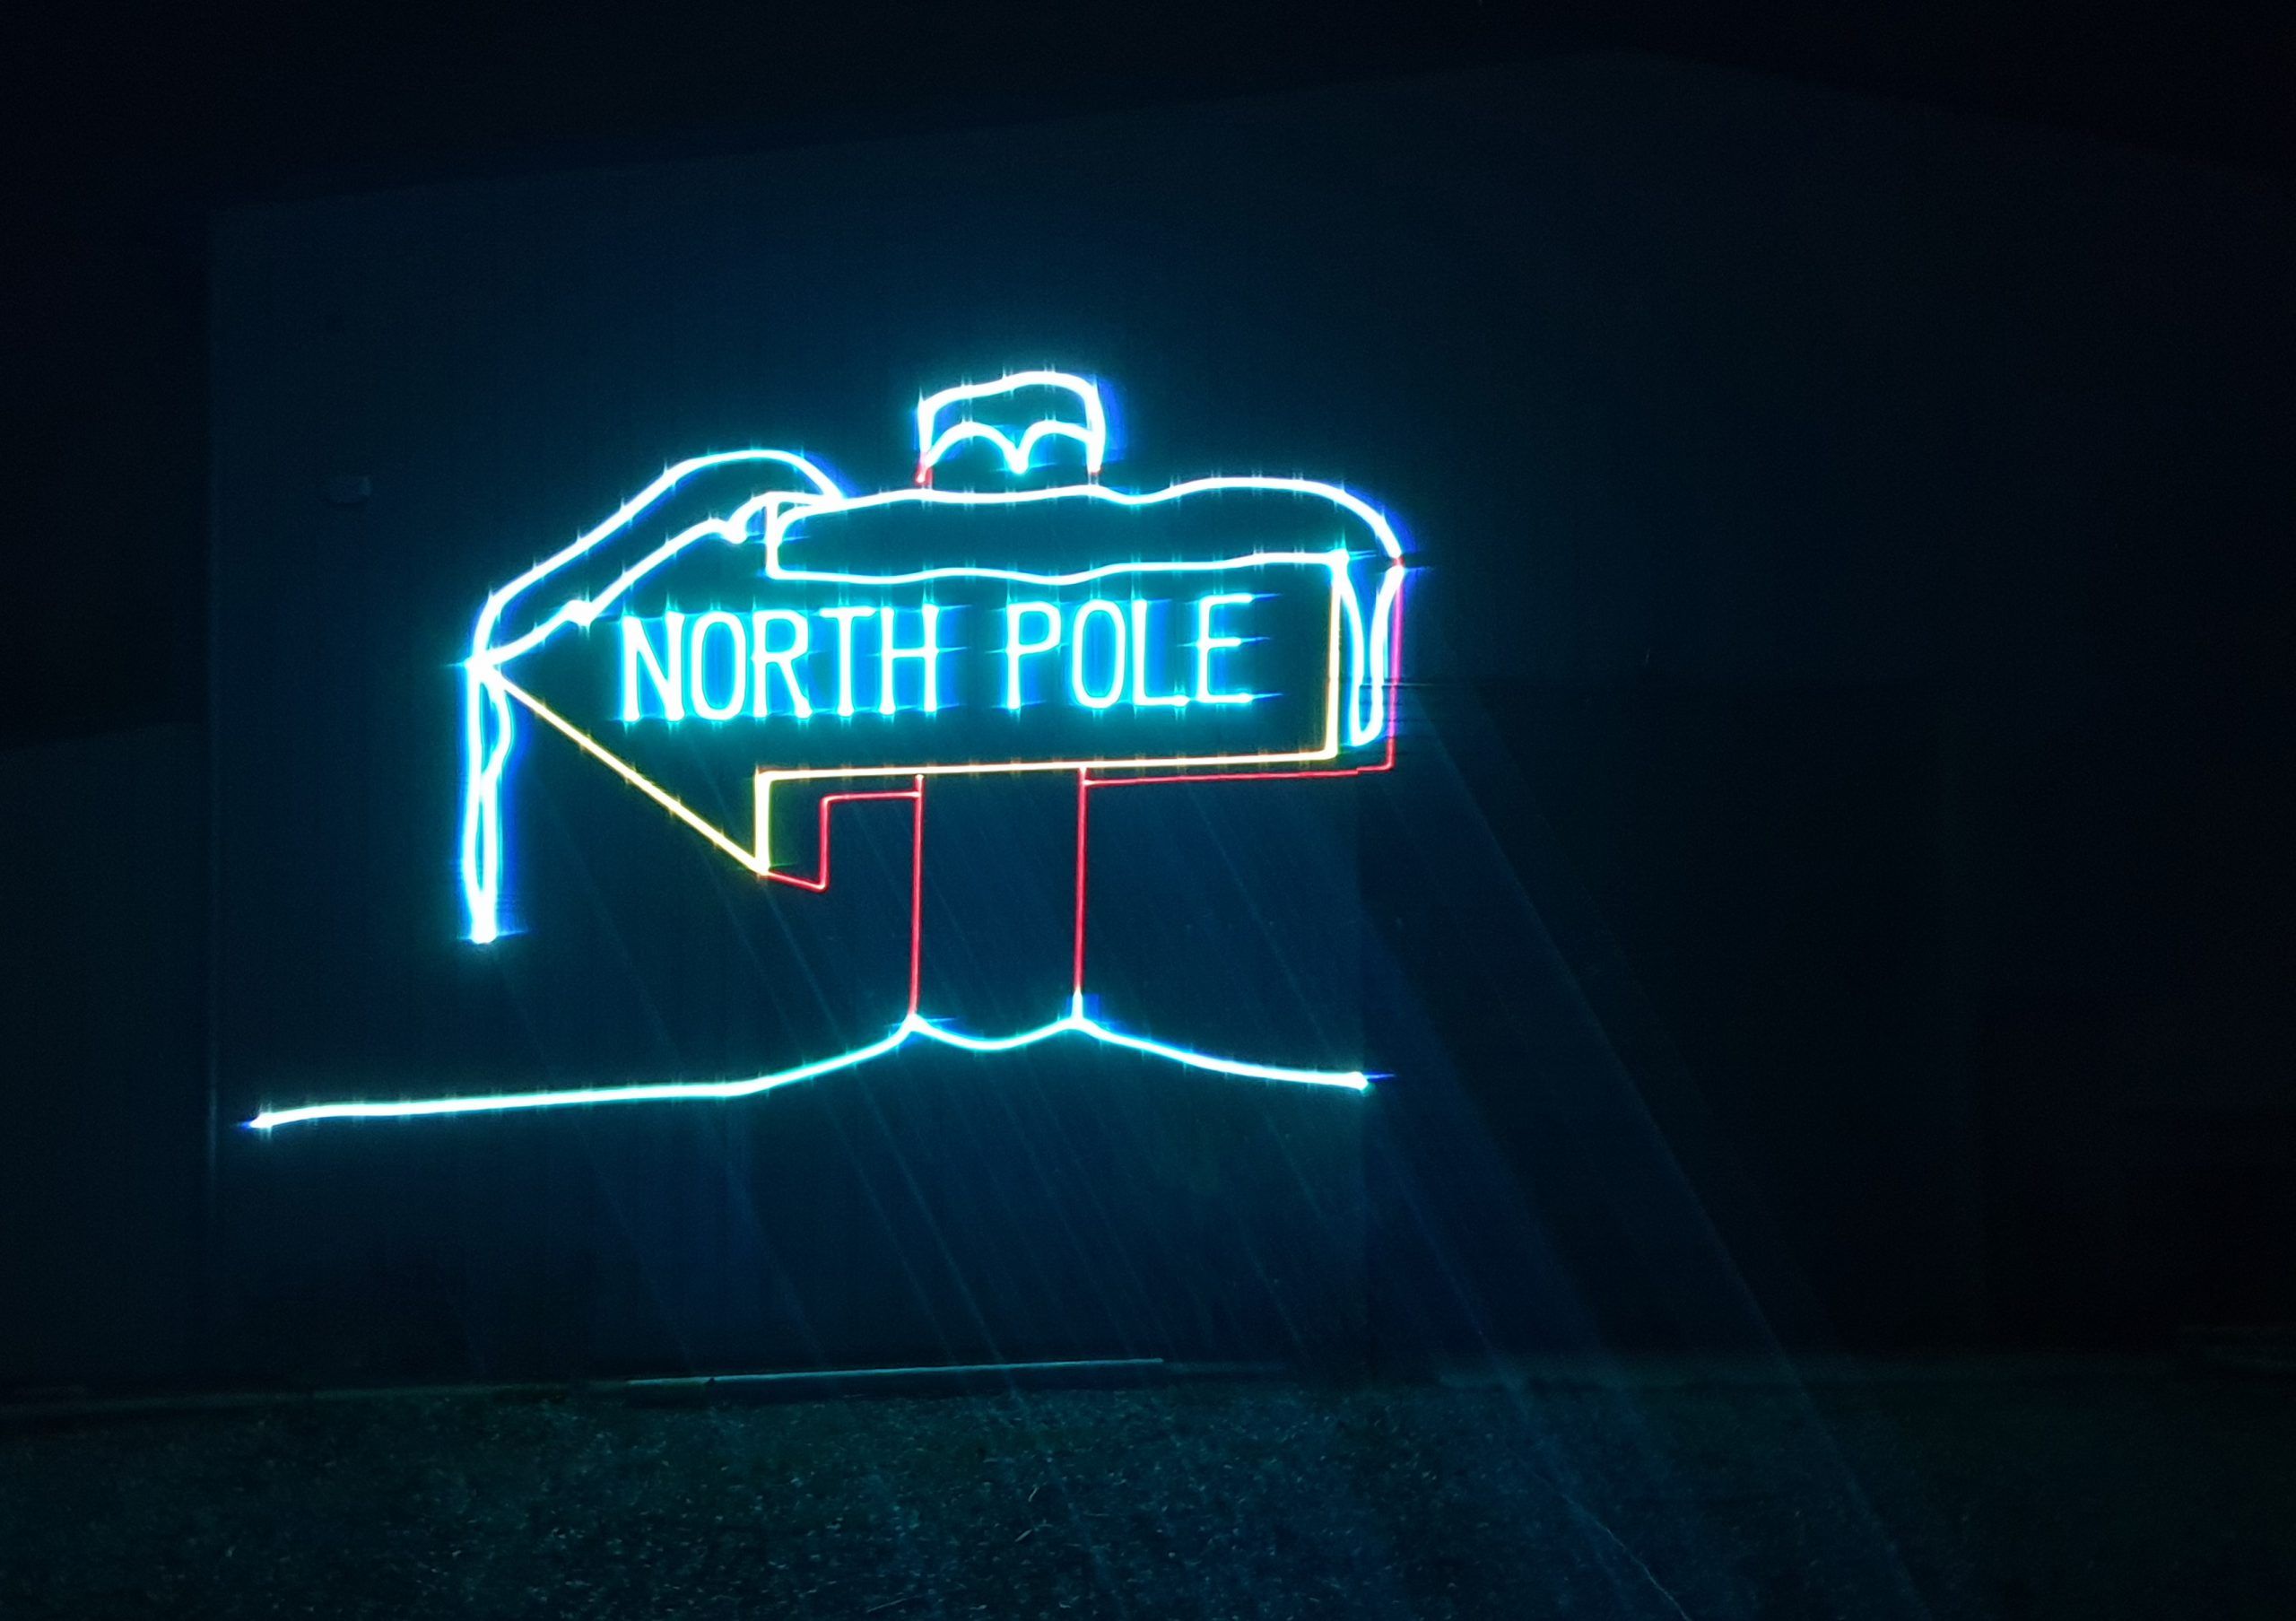 Projection of a laser panel with North Pole written on it